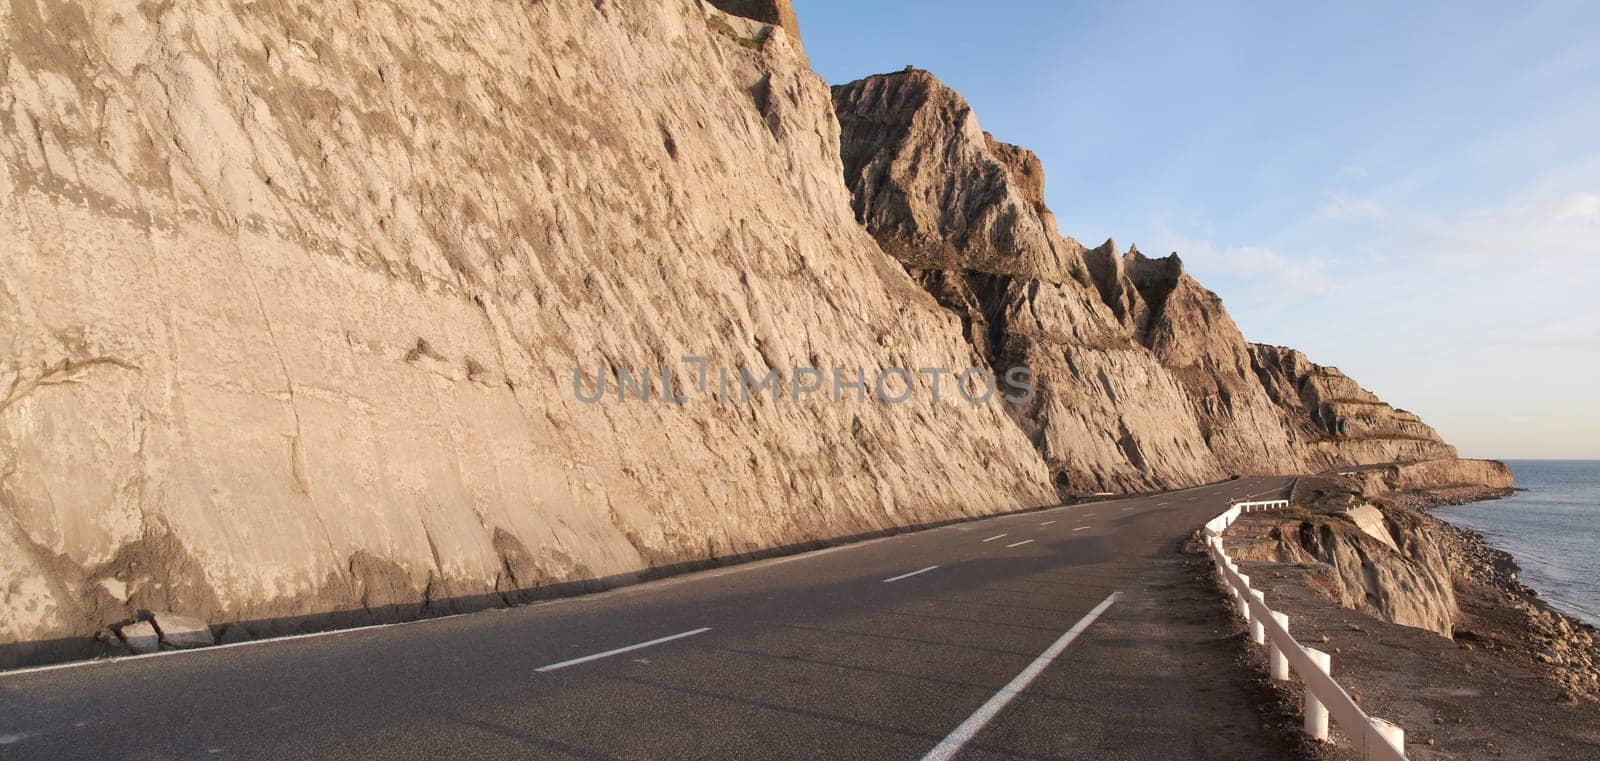 Road, mountain and travel with coastal landscape, direction and destination with asphalt and nature. Environment, street and beach location with journey and traveling view outdoor with horizon.